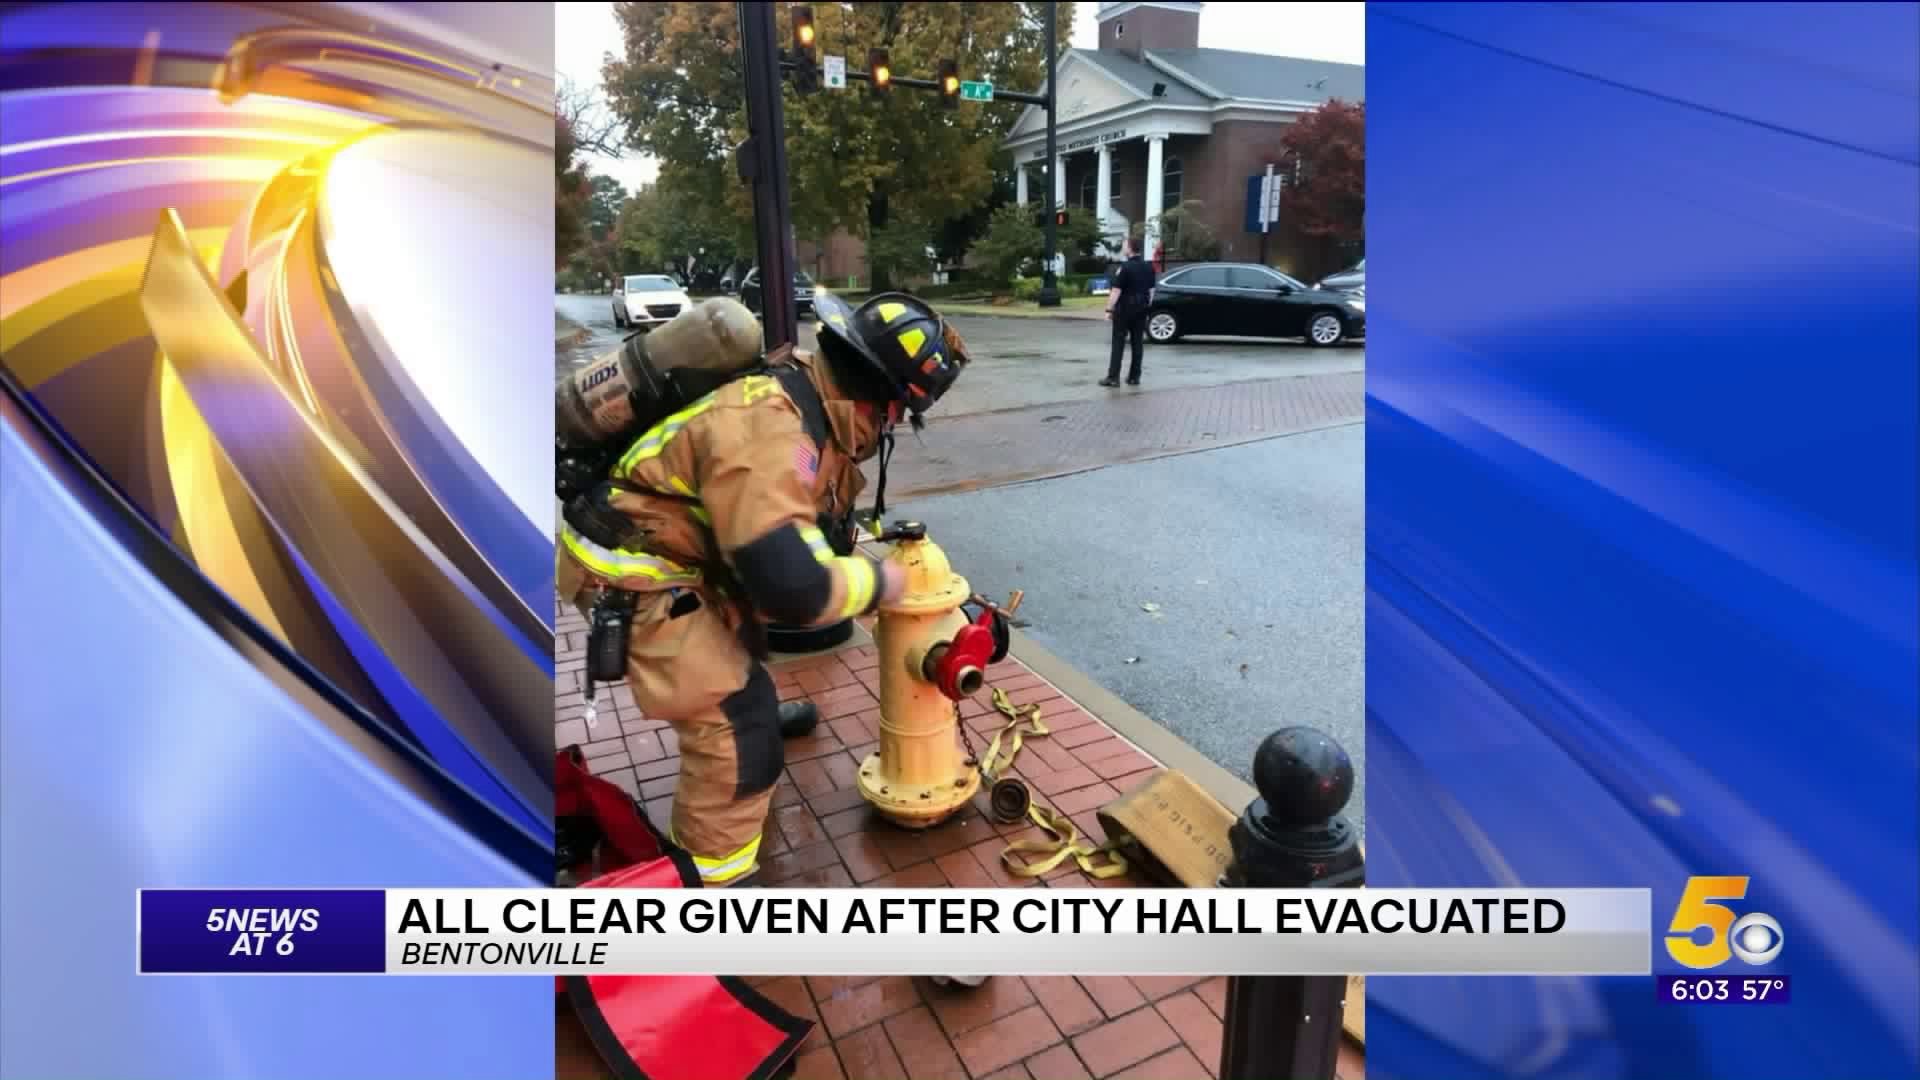 Bentonville City Hall Evacuated After Fire Alarm Goes Off